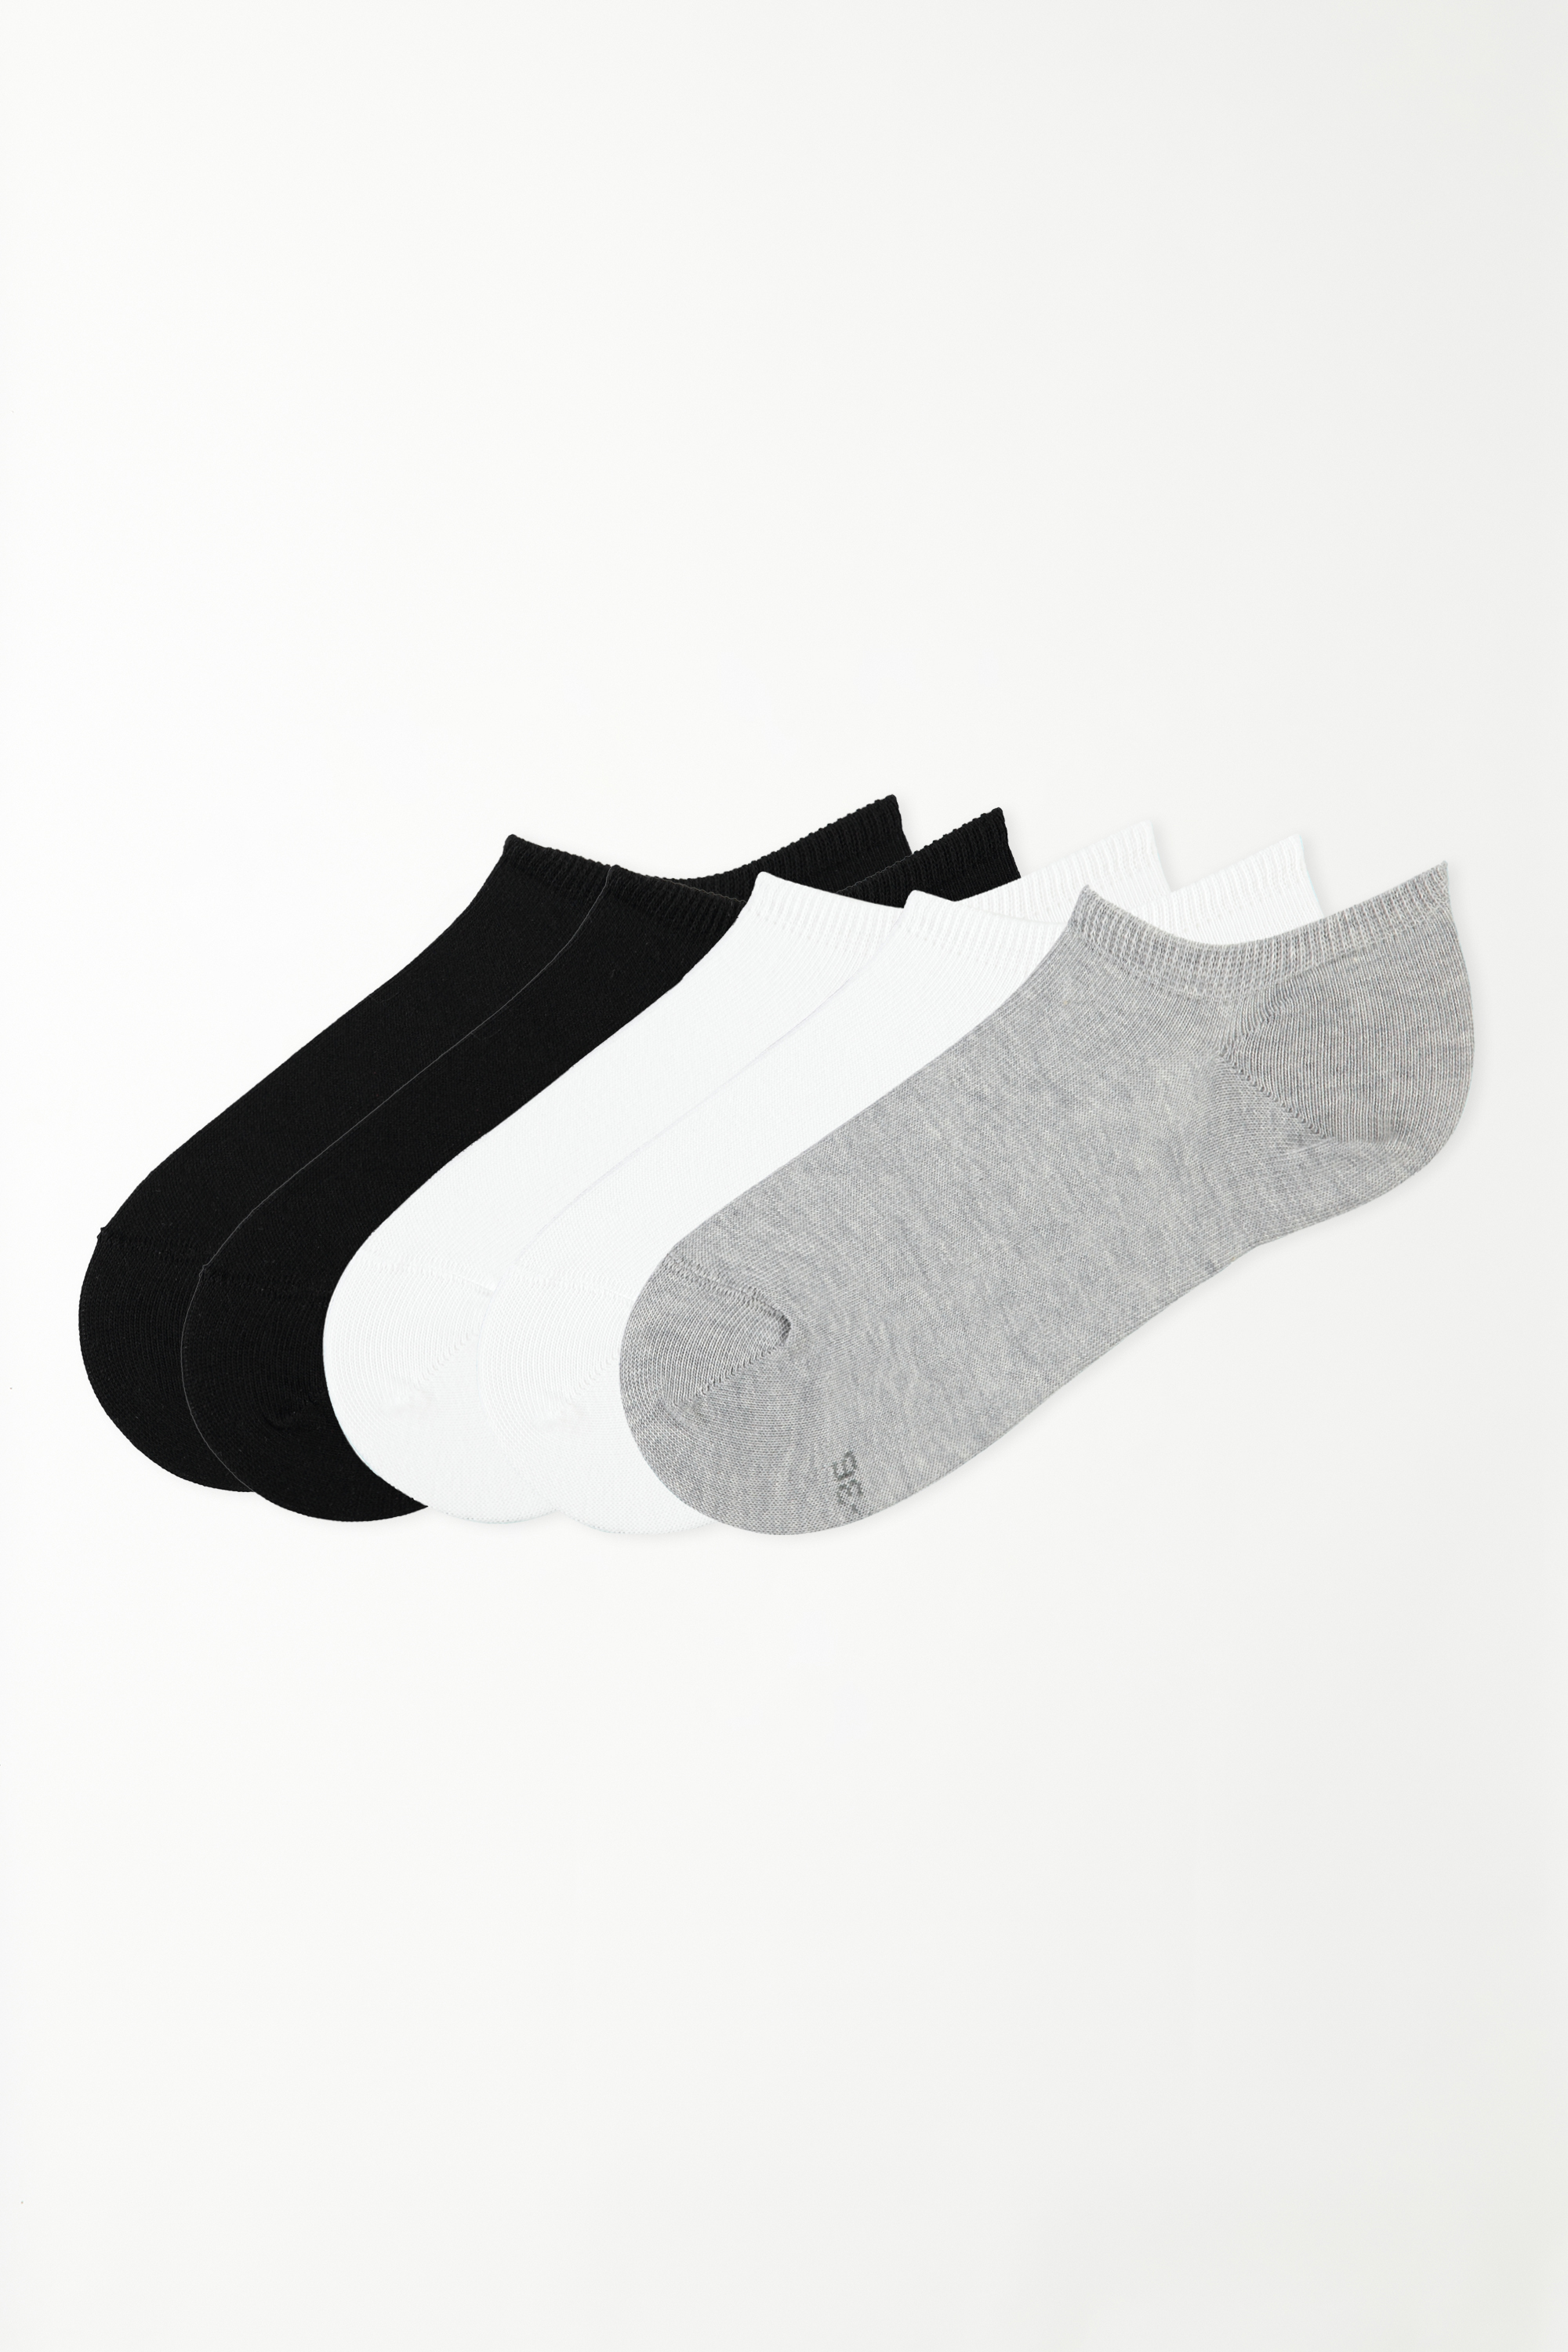 5 X Solid Color Cotton Ankle Socks